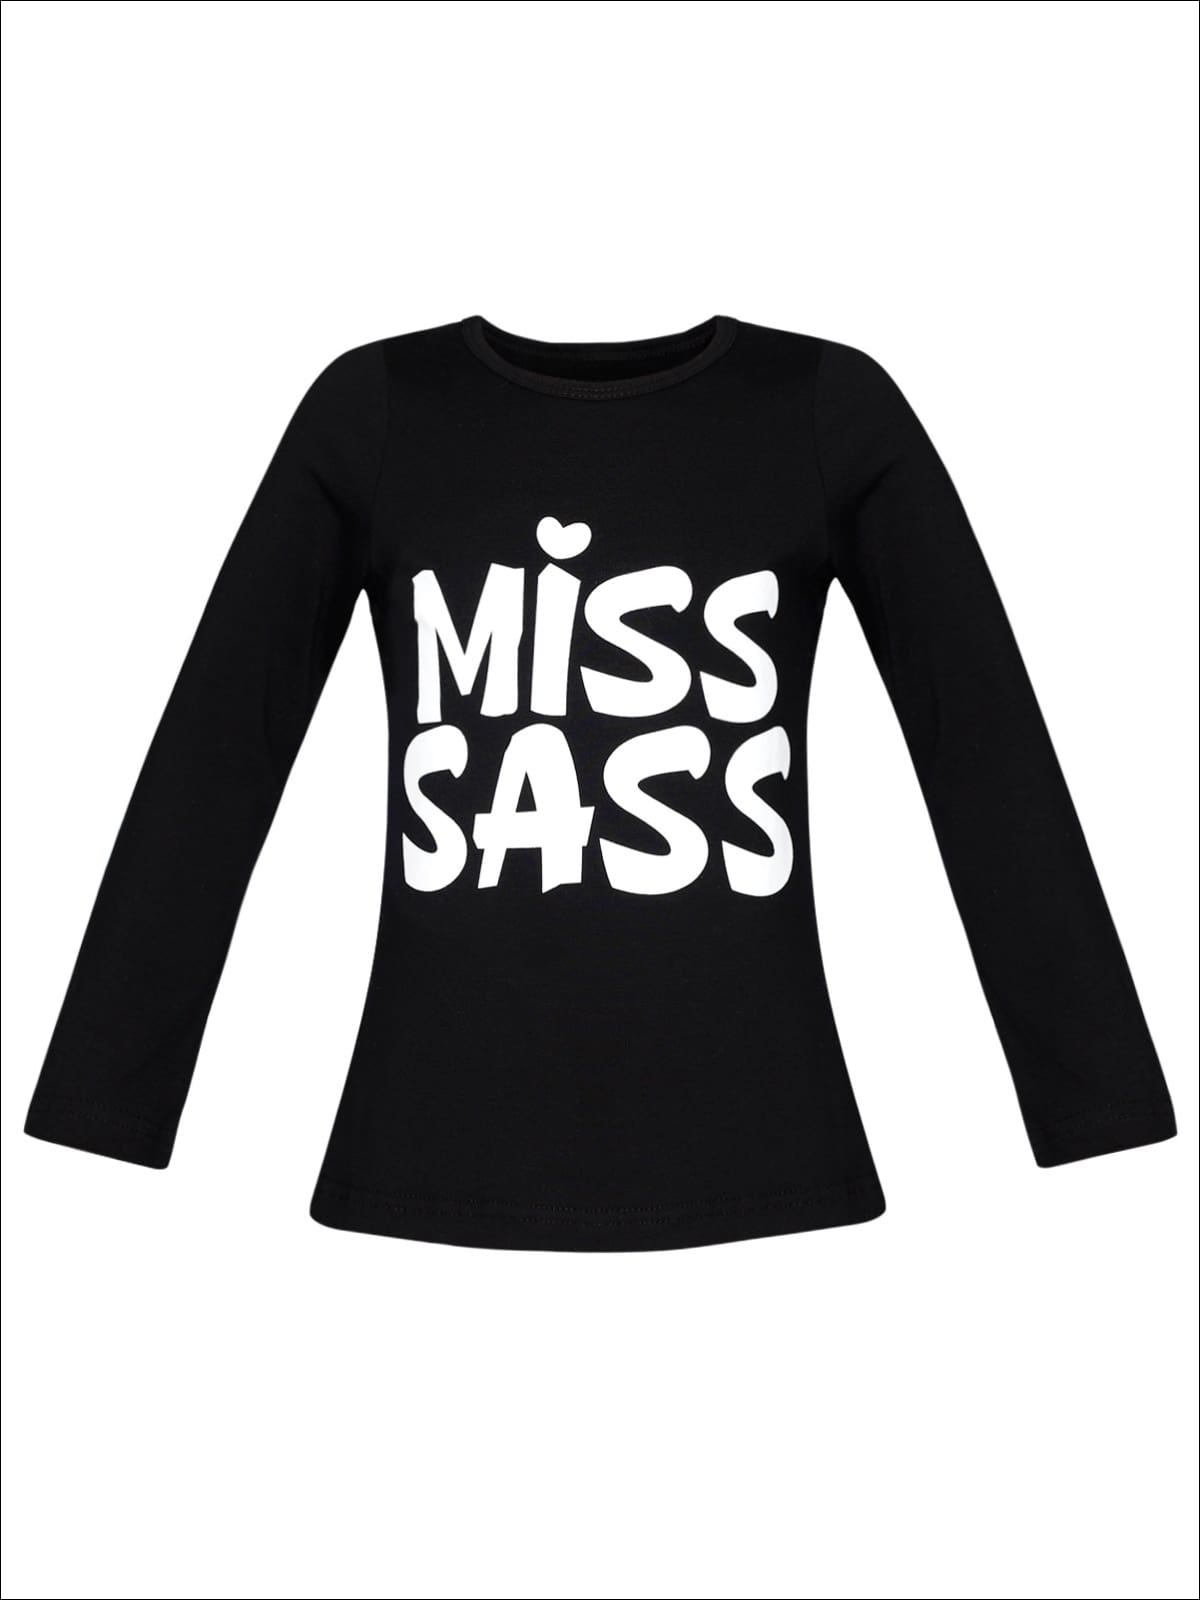 Girls Miss Sass Long Sleeve Graphic Statement Top - Black / 2T/3T - Girls Fall Top